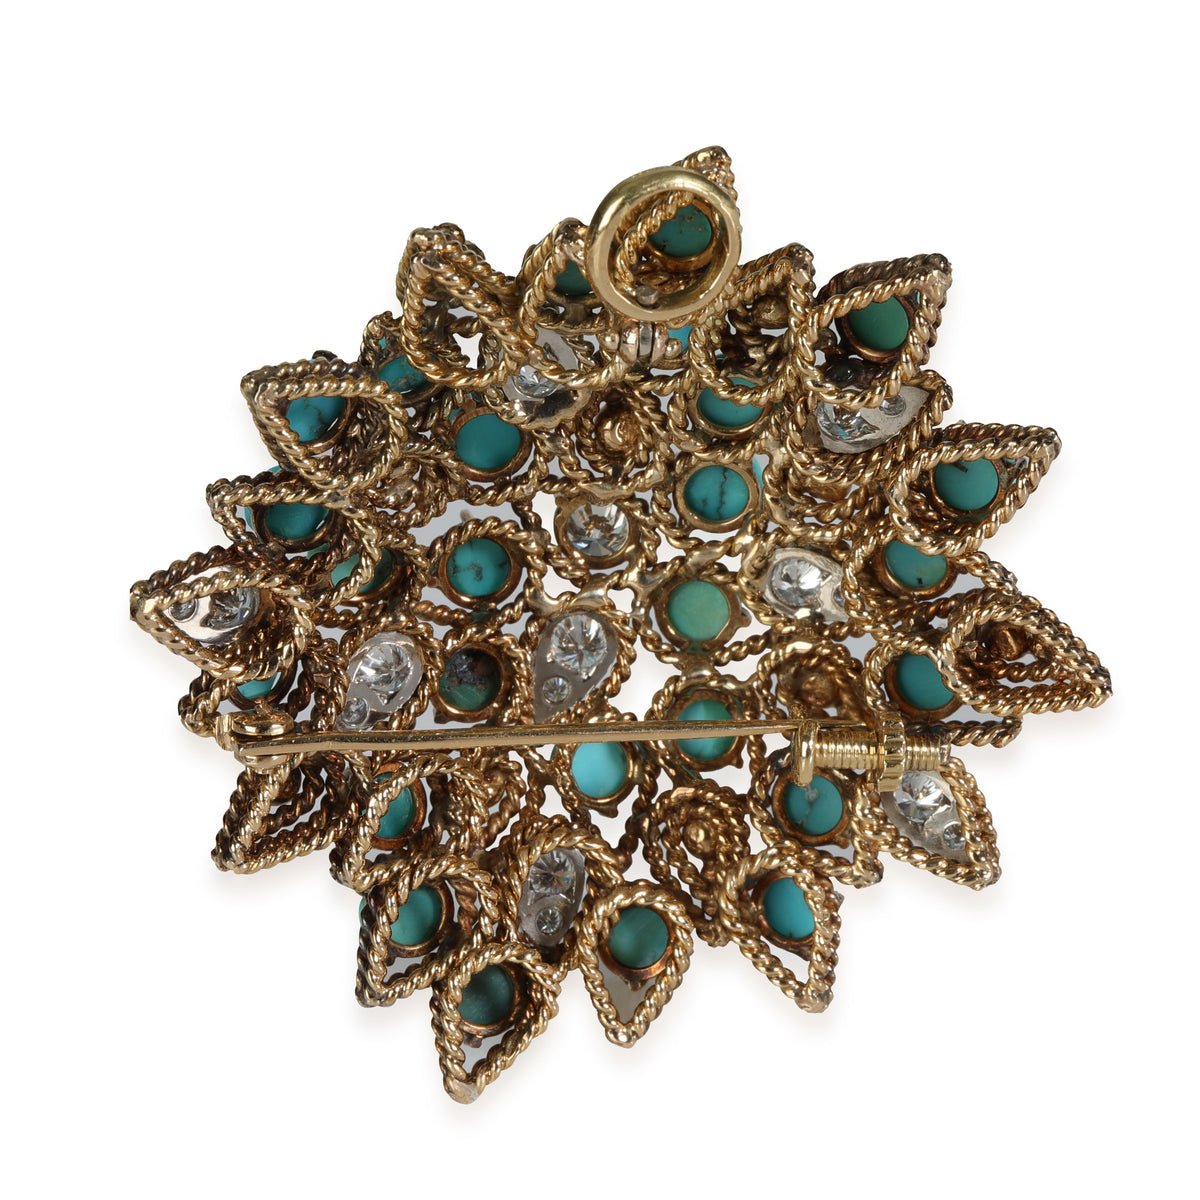 Cabouchon Turquoise & Diamond Vintage Brooch in 14-16K Yellow Gold 2.33 Ctw